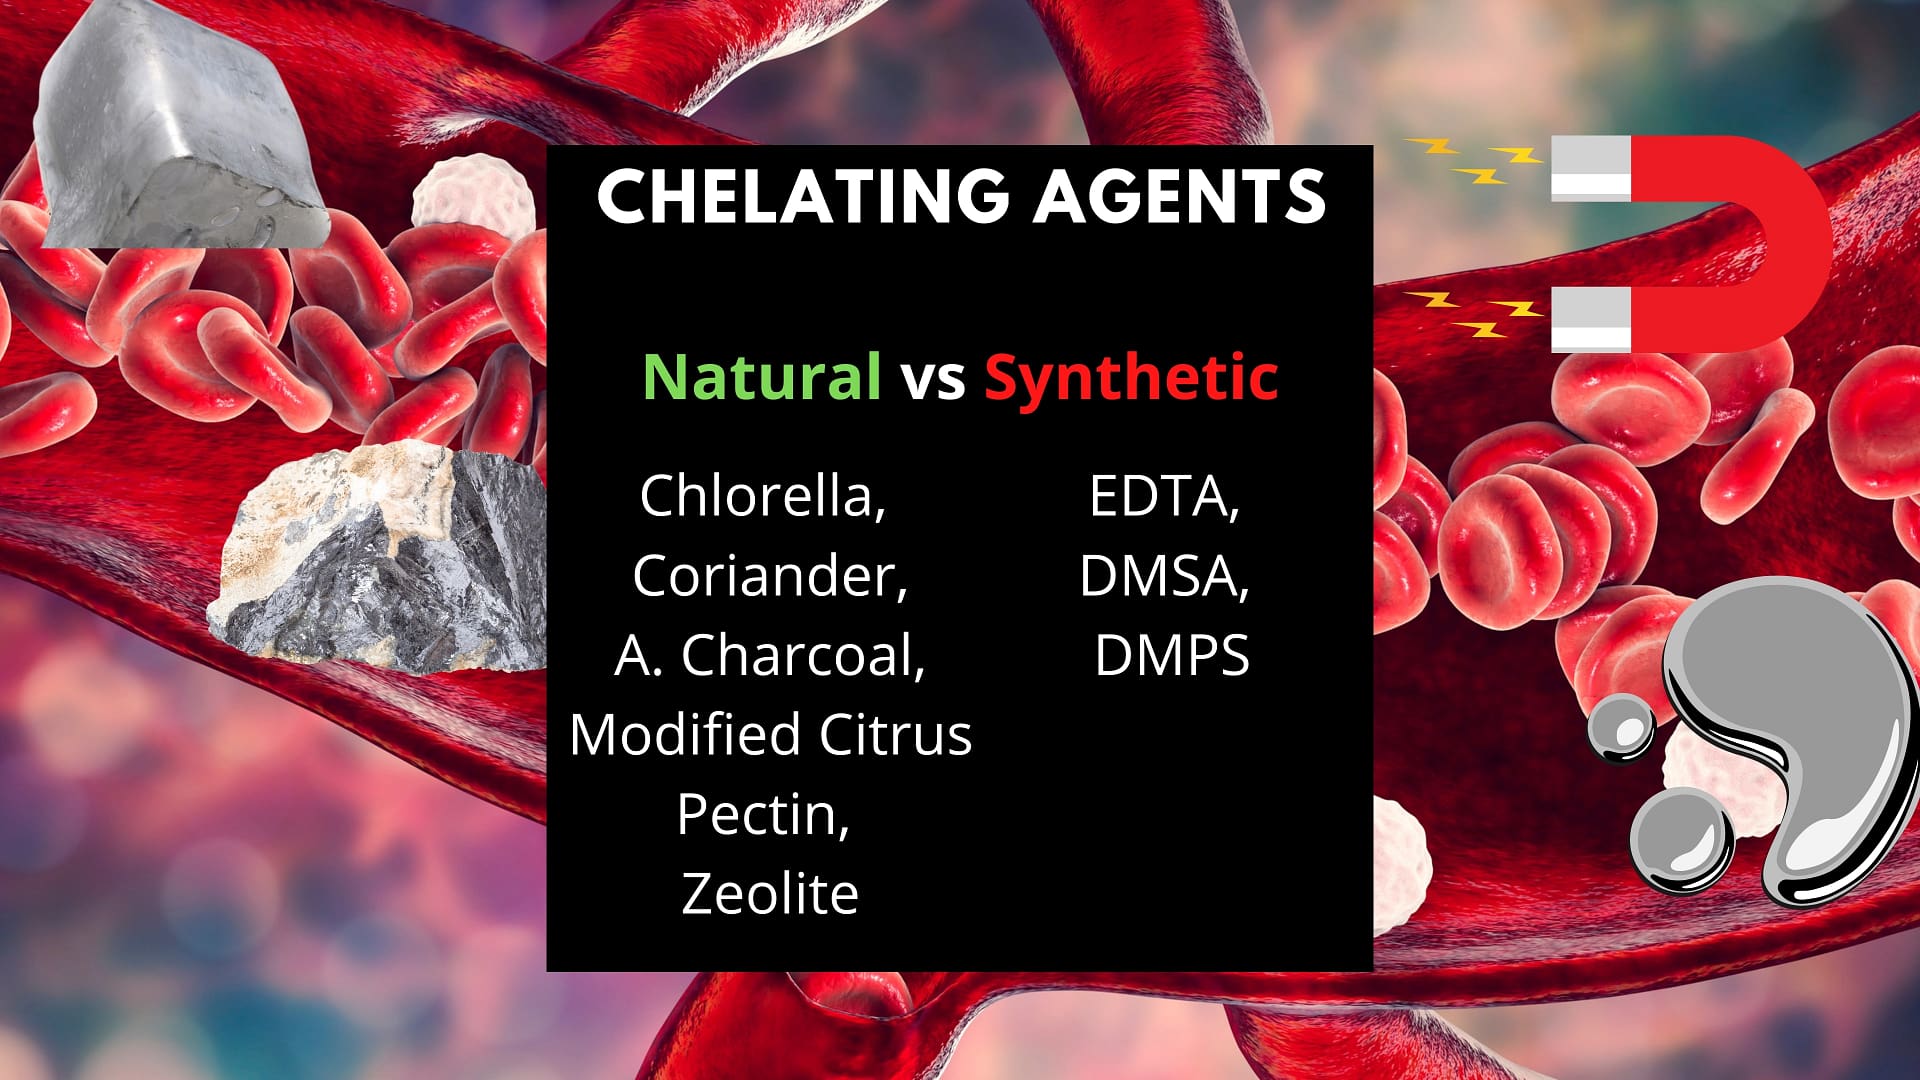 Natural vs synthetic chelating agents for a heavy metal detox.